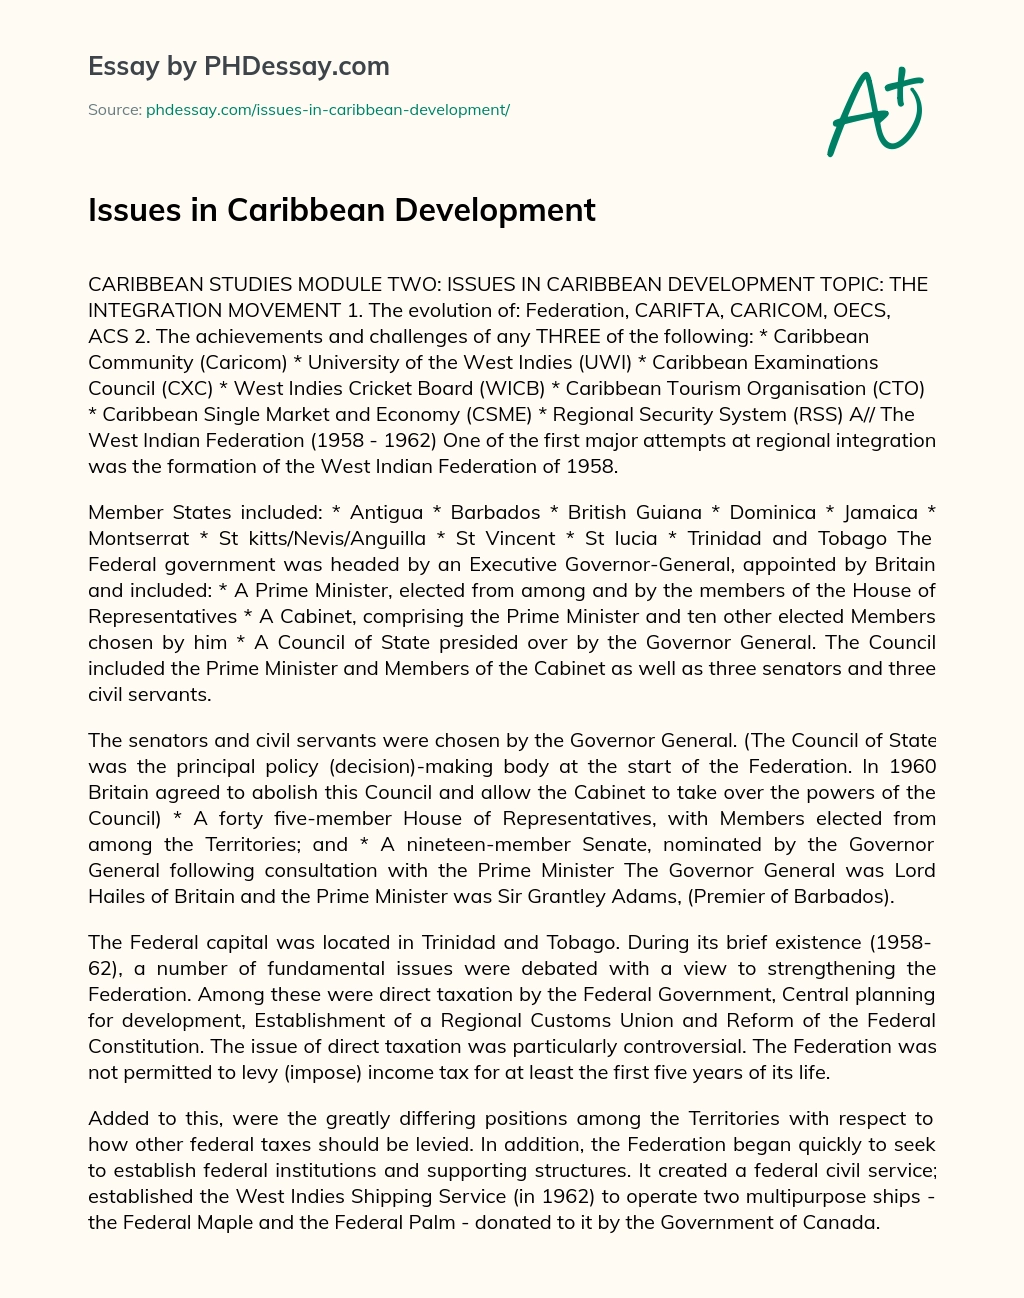 Issues in Caribbean Development essay